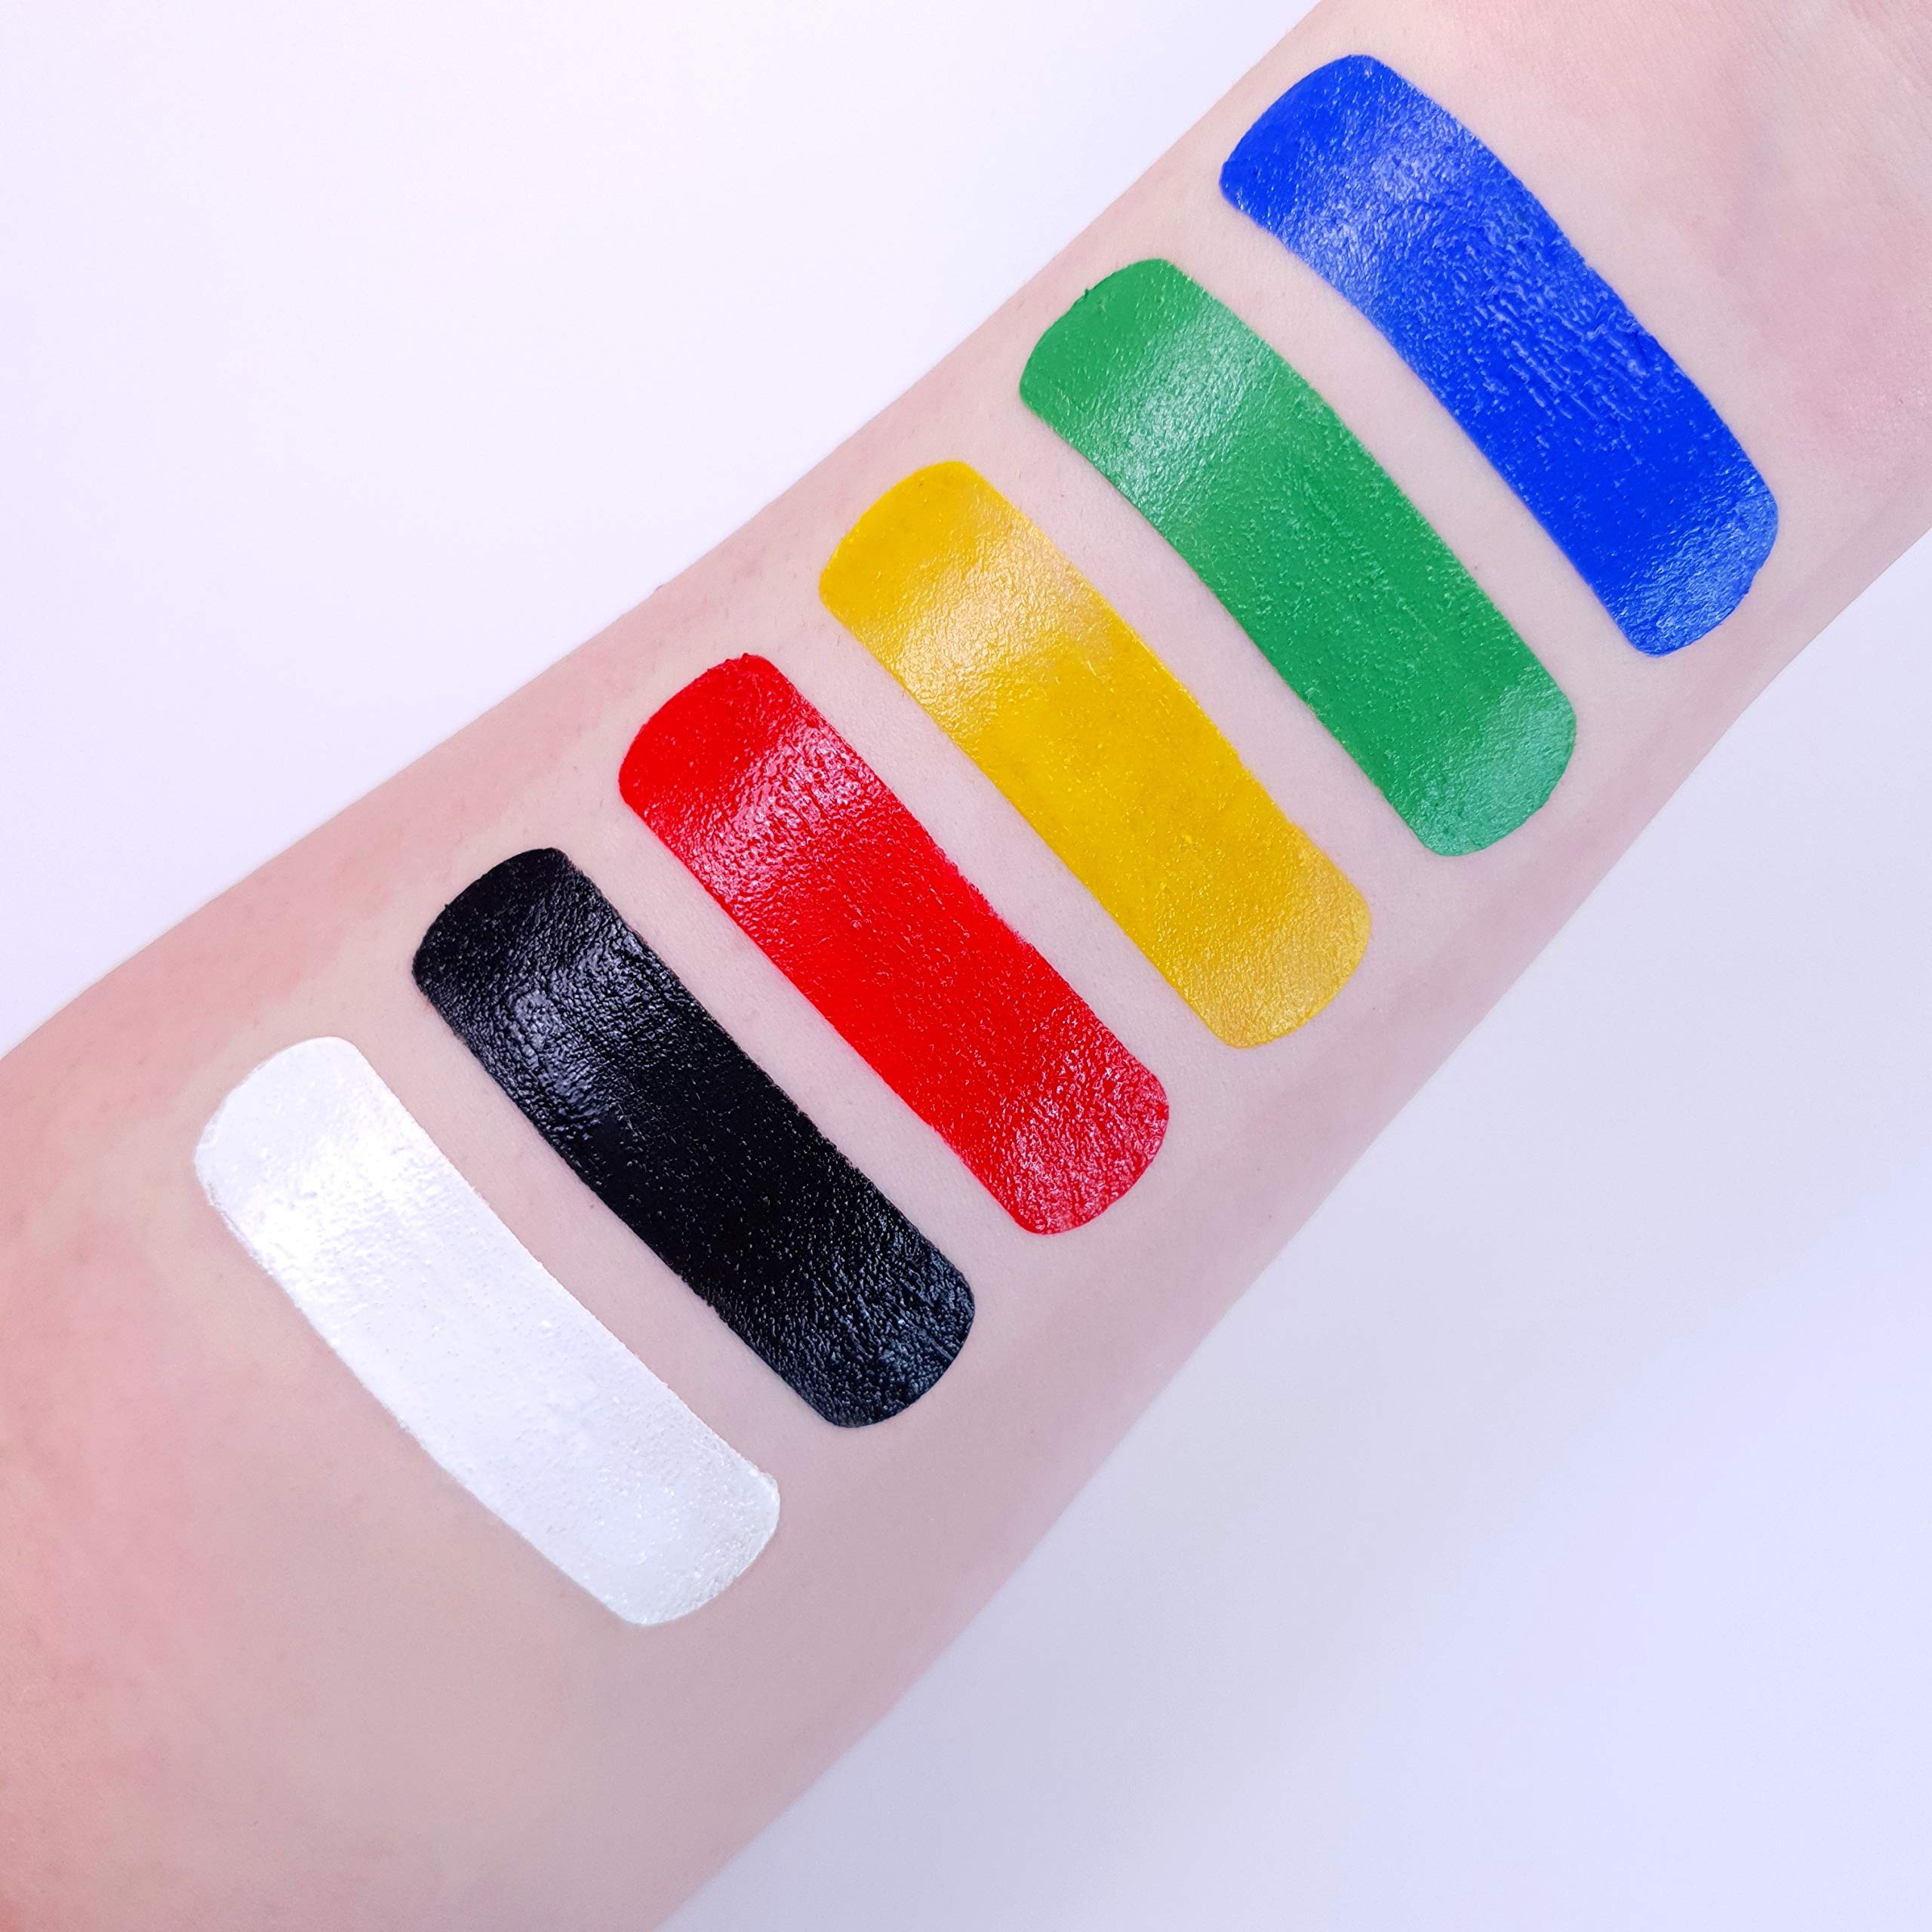 Face Paint Stick / Body Crayon Primary Colours Set of 6 Makeup for The Face & Body by Moon Creations - 0.12oz